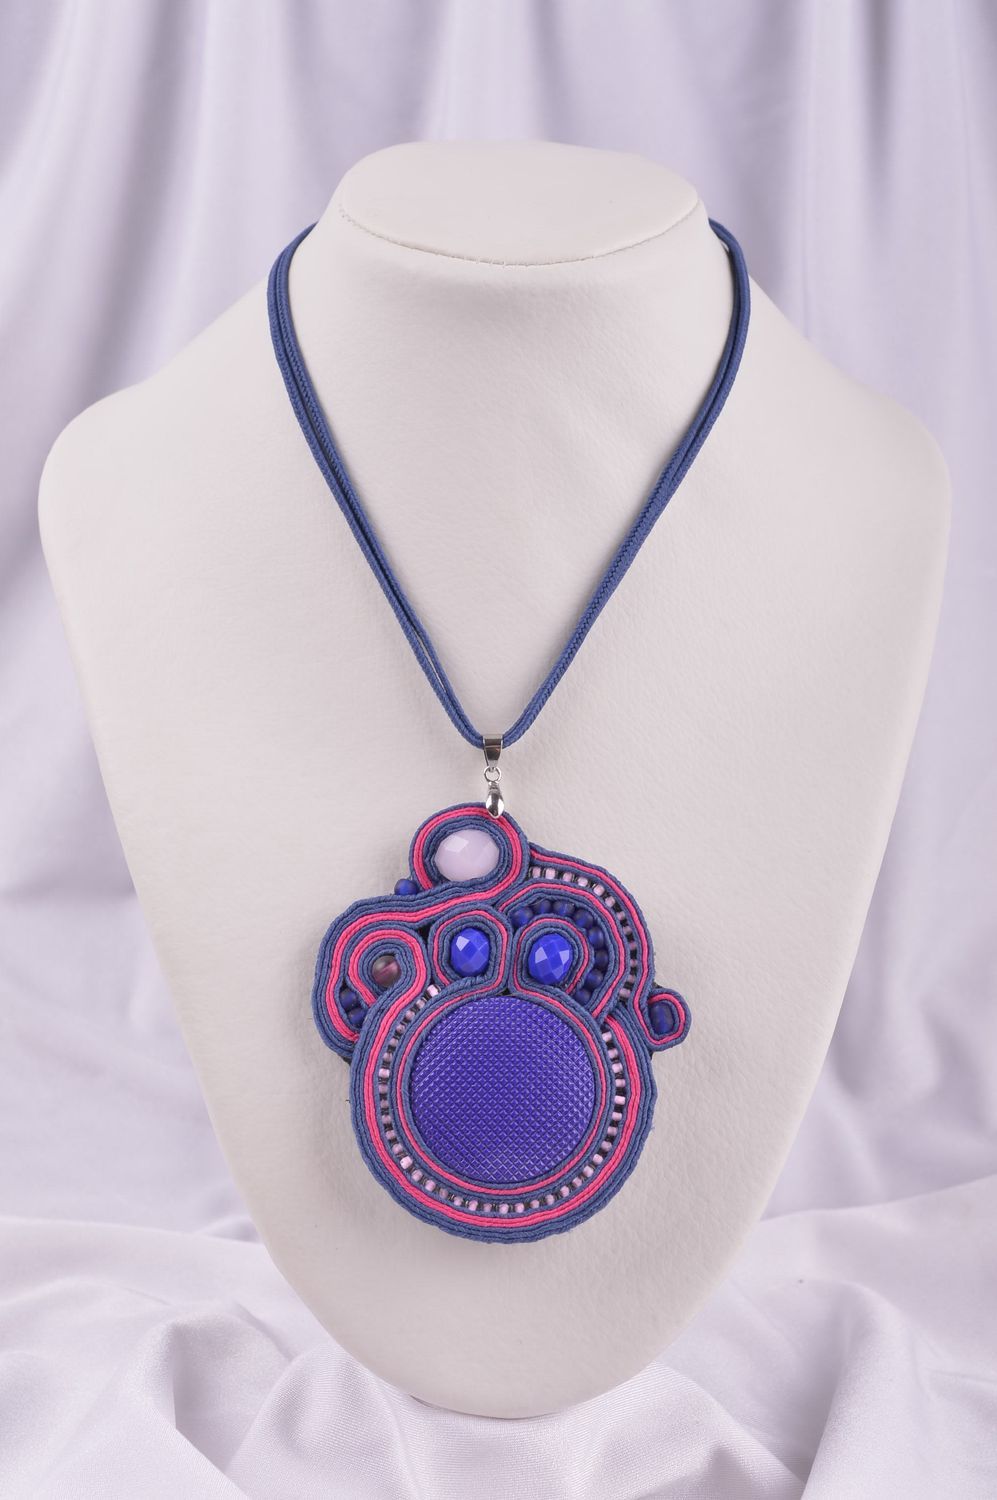 Stylish handmade beaded pendant textile necklace soutache jewelry gifts for her photo 1